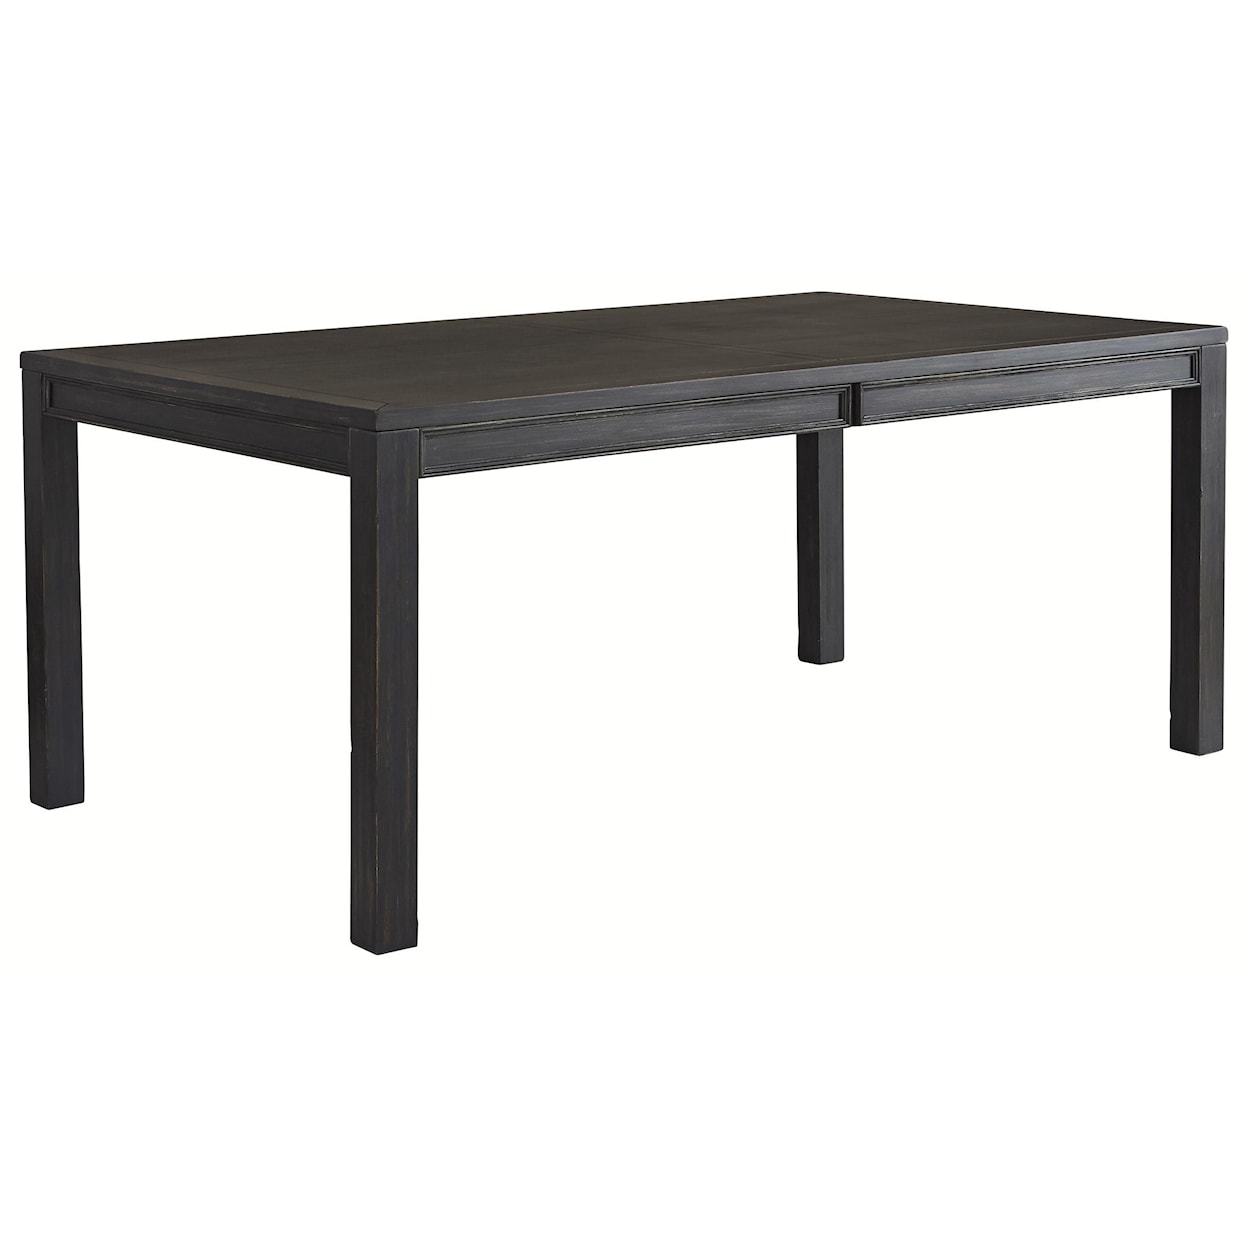 Ashley Furniture Jeanette Dining Room RECT Table